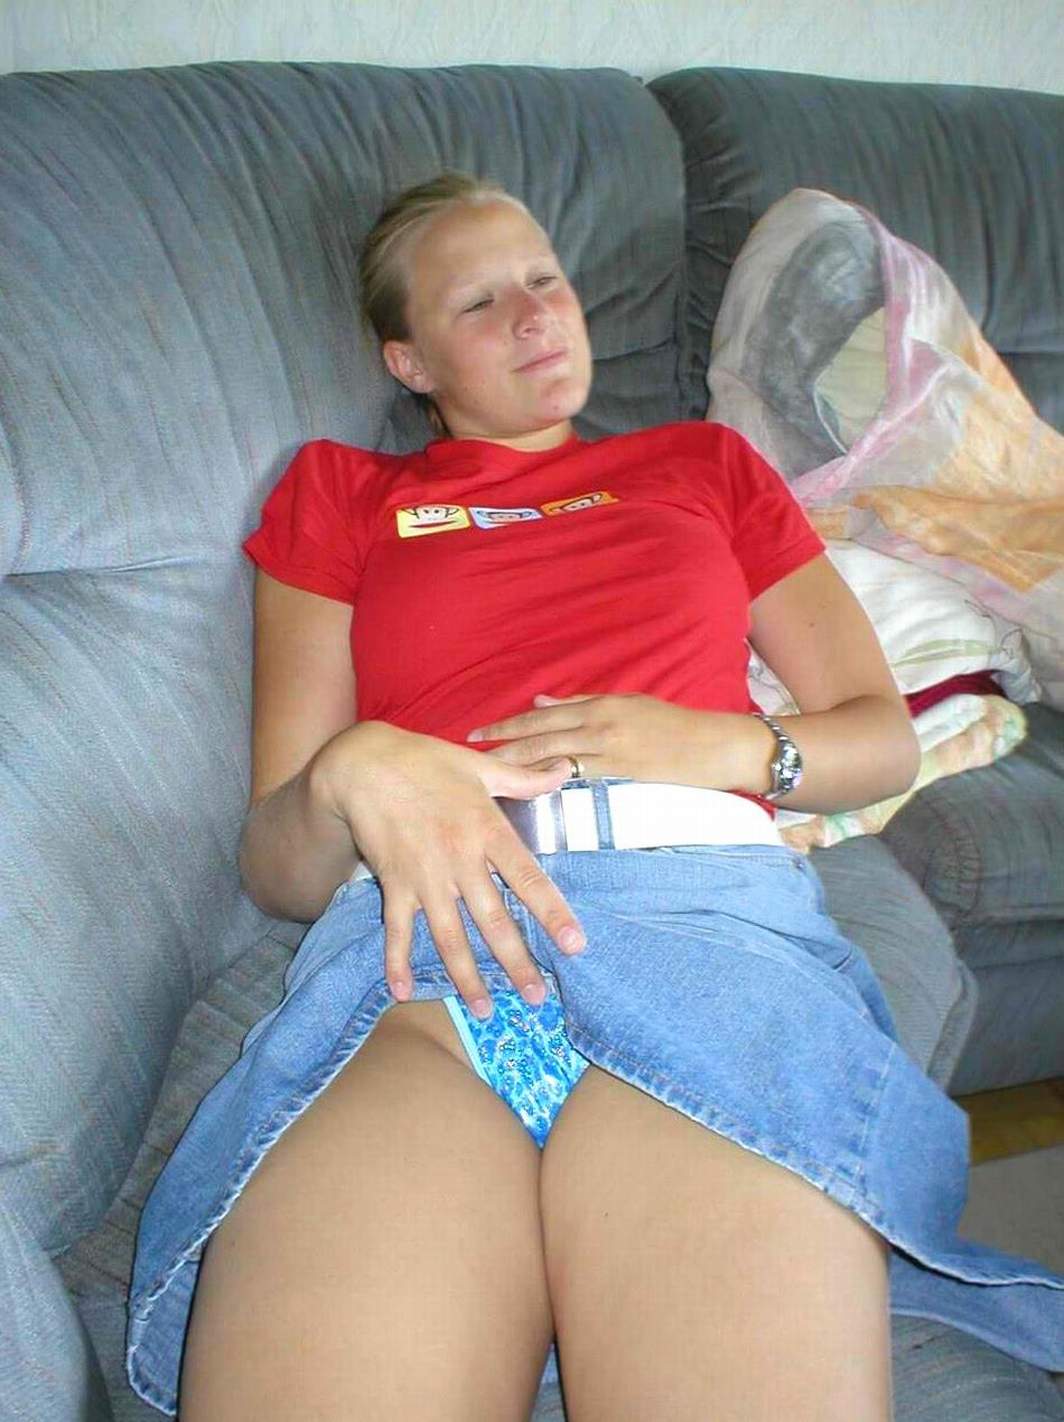 Amateur homemade Porn very hot archive FREE